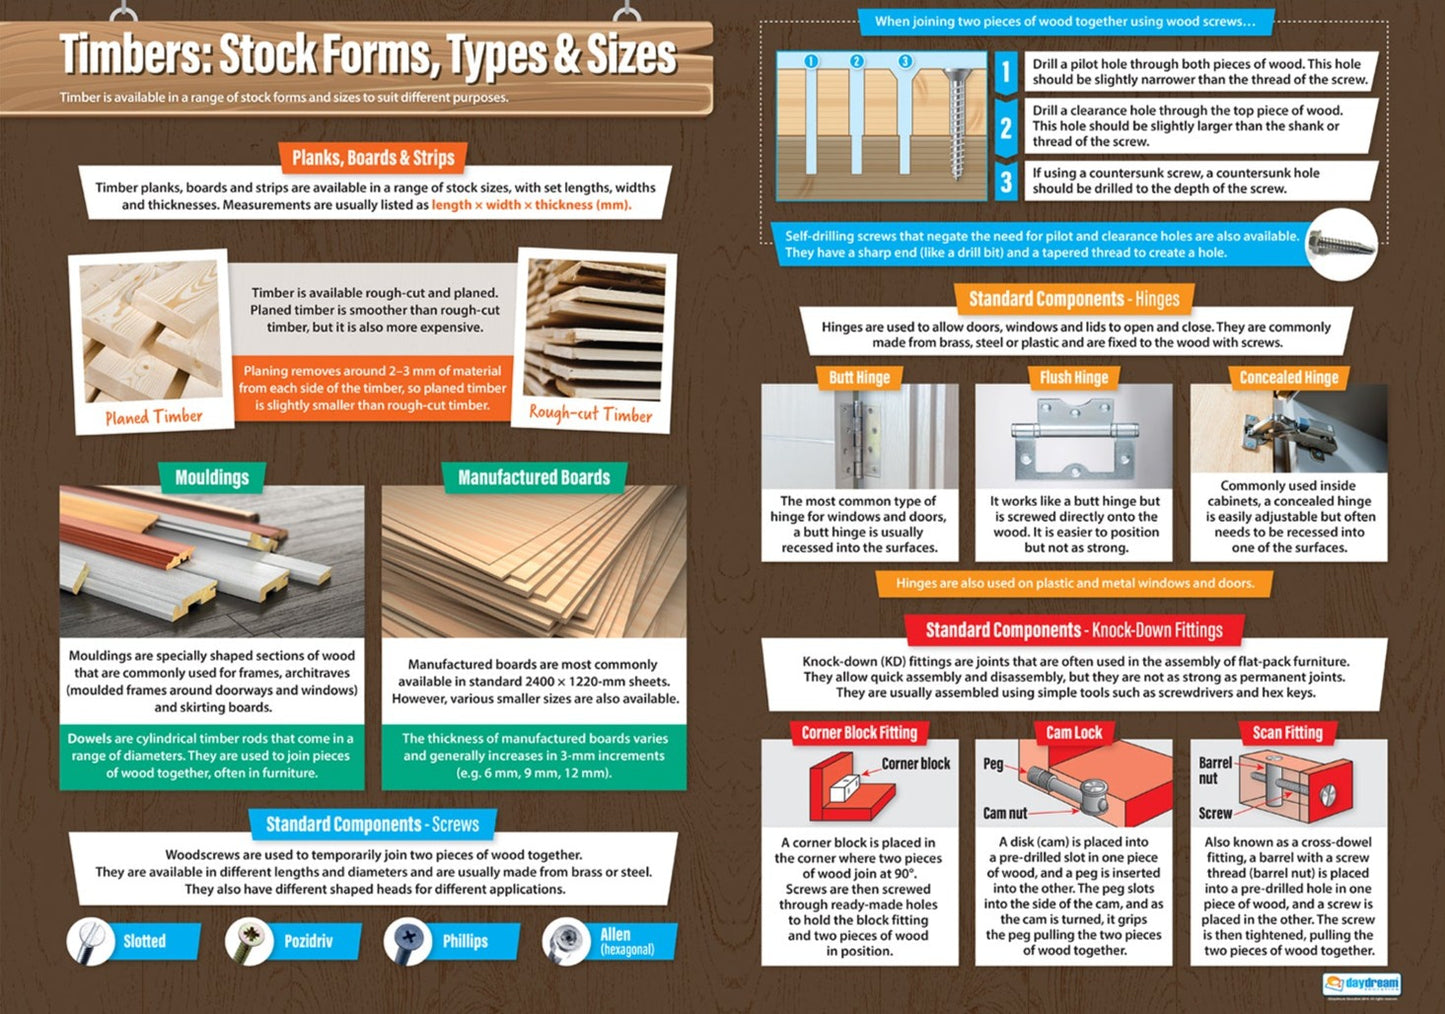 Timbers: Stock Forms, Types & Sizes Poster, Design & Technology Posters, Food Technology, Design Charts, Design & Technology Charts for the Classroom, Technology Charts, Design & Technology Education, Material Properties, Visual Learning, Classroom Decor, Design Confidence, Material Selection, Product Development, Product Functionality, A1 Size, Learner-Friendly Design, Engaging Resources, Collaborative Learning